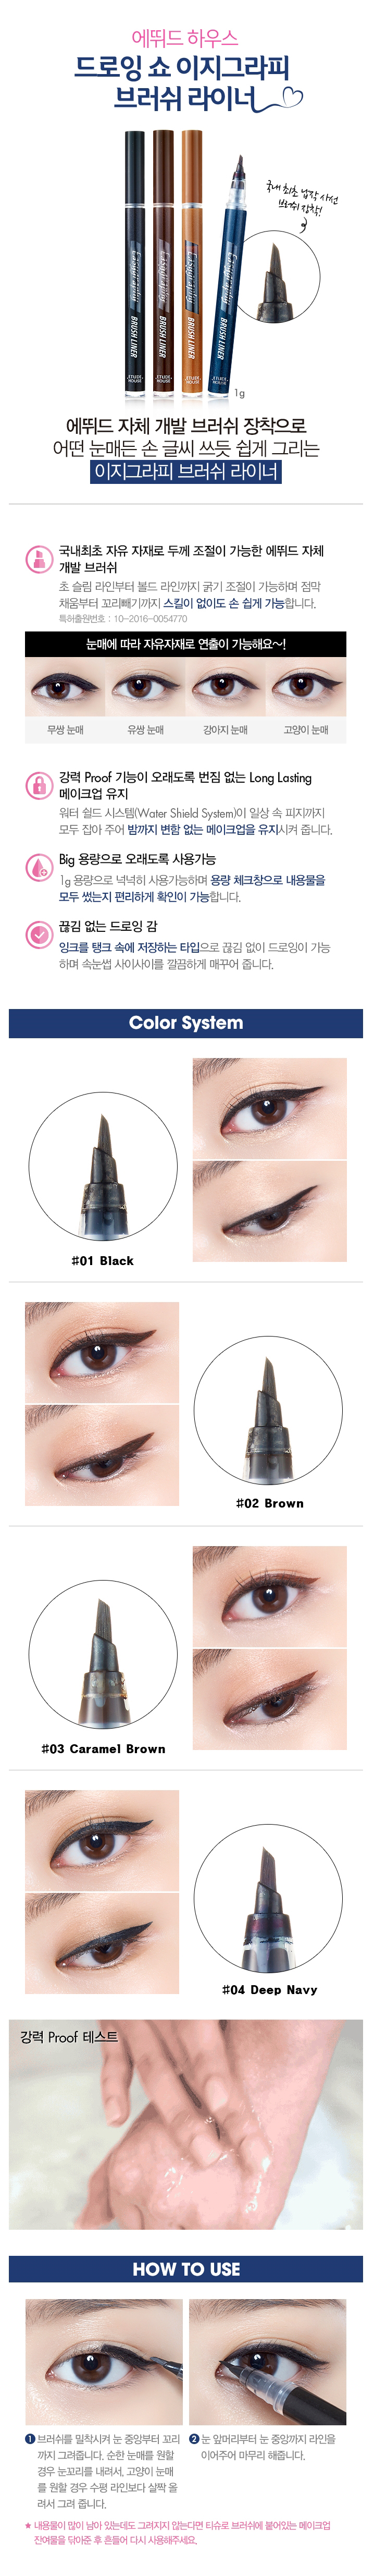 etude-house-drawing-show-easygraphy-brush-liner-1.jpg